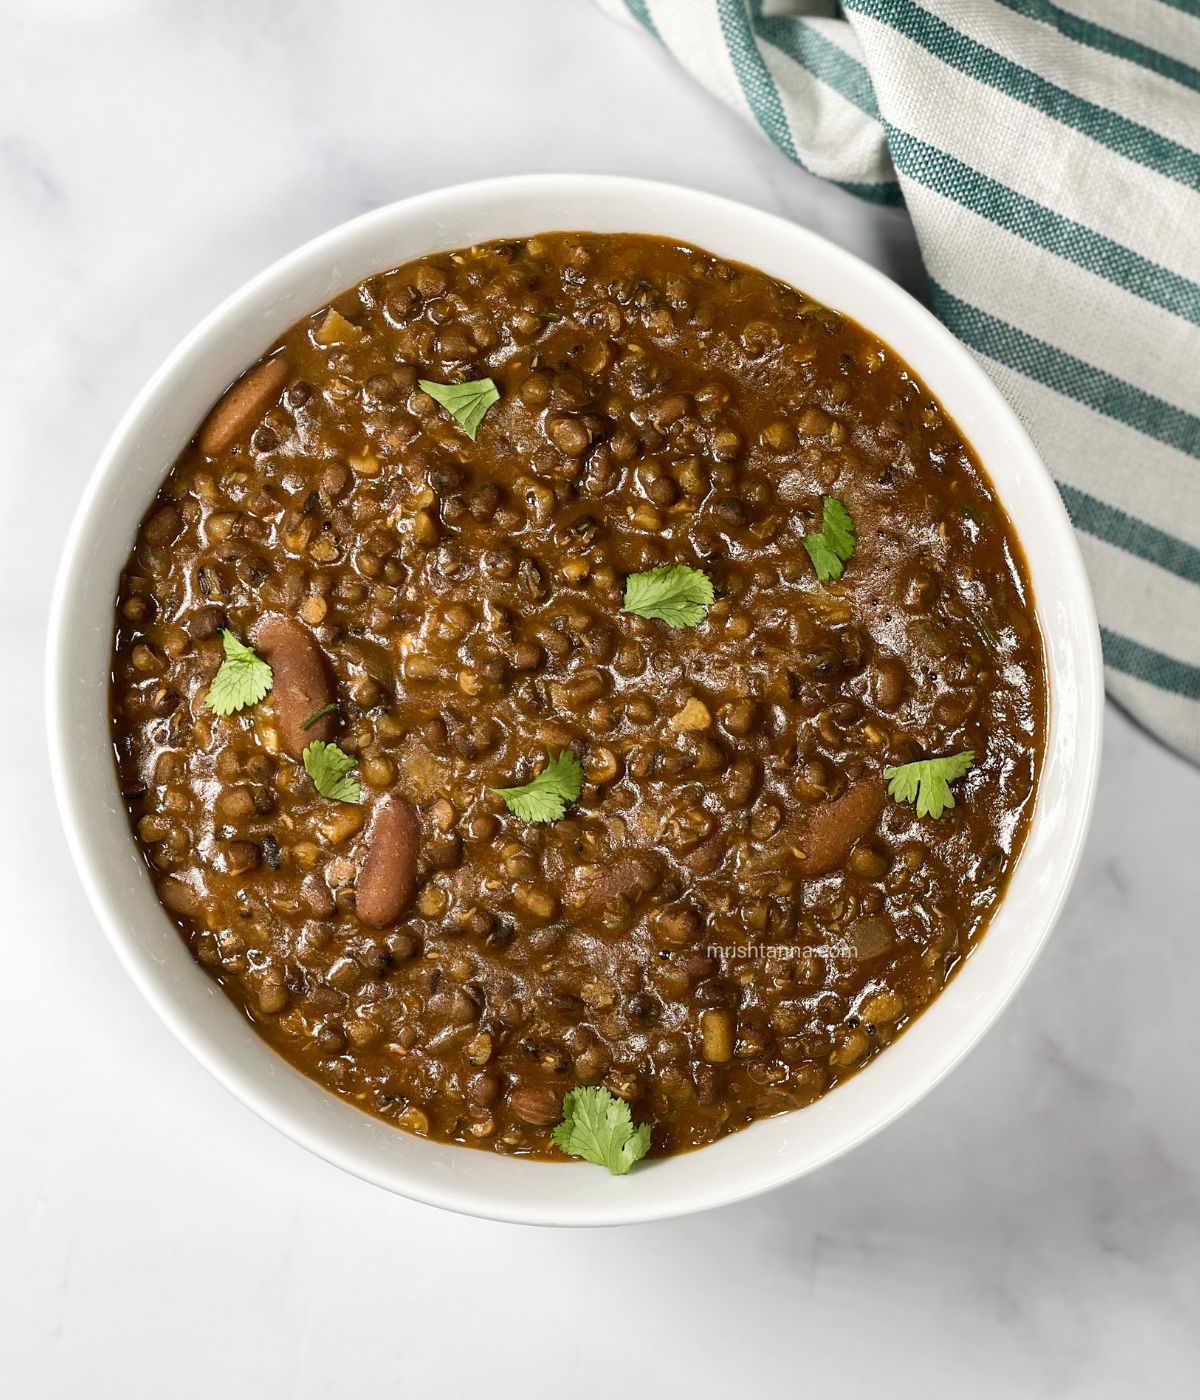 A bowl of vegan dal makhani is on the table.